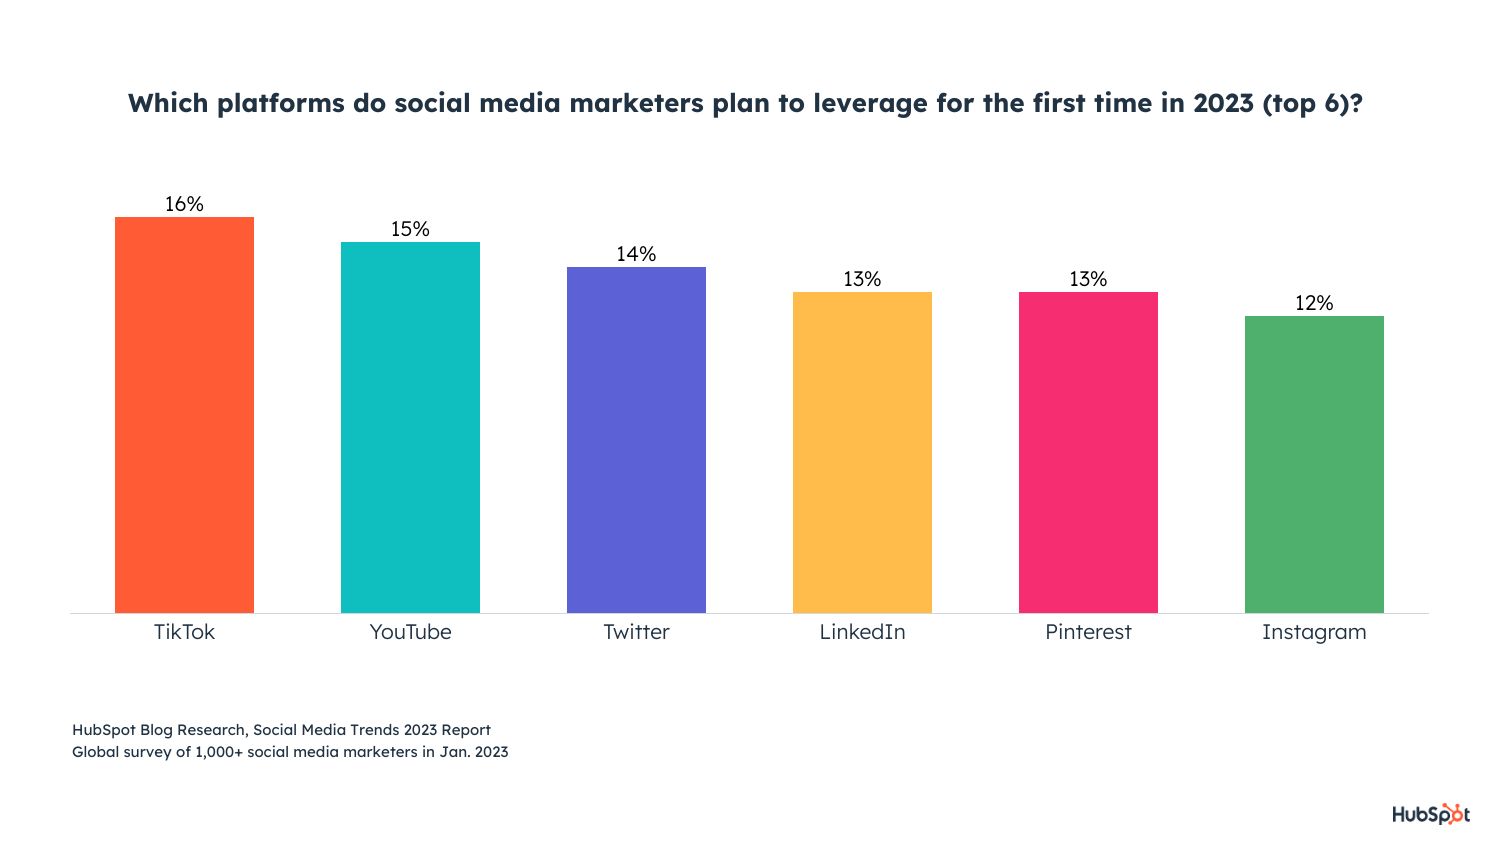 which platforms will be used for the first time by social media marketers